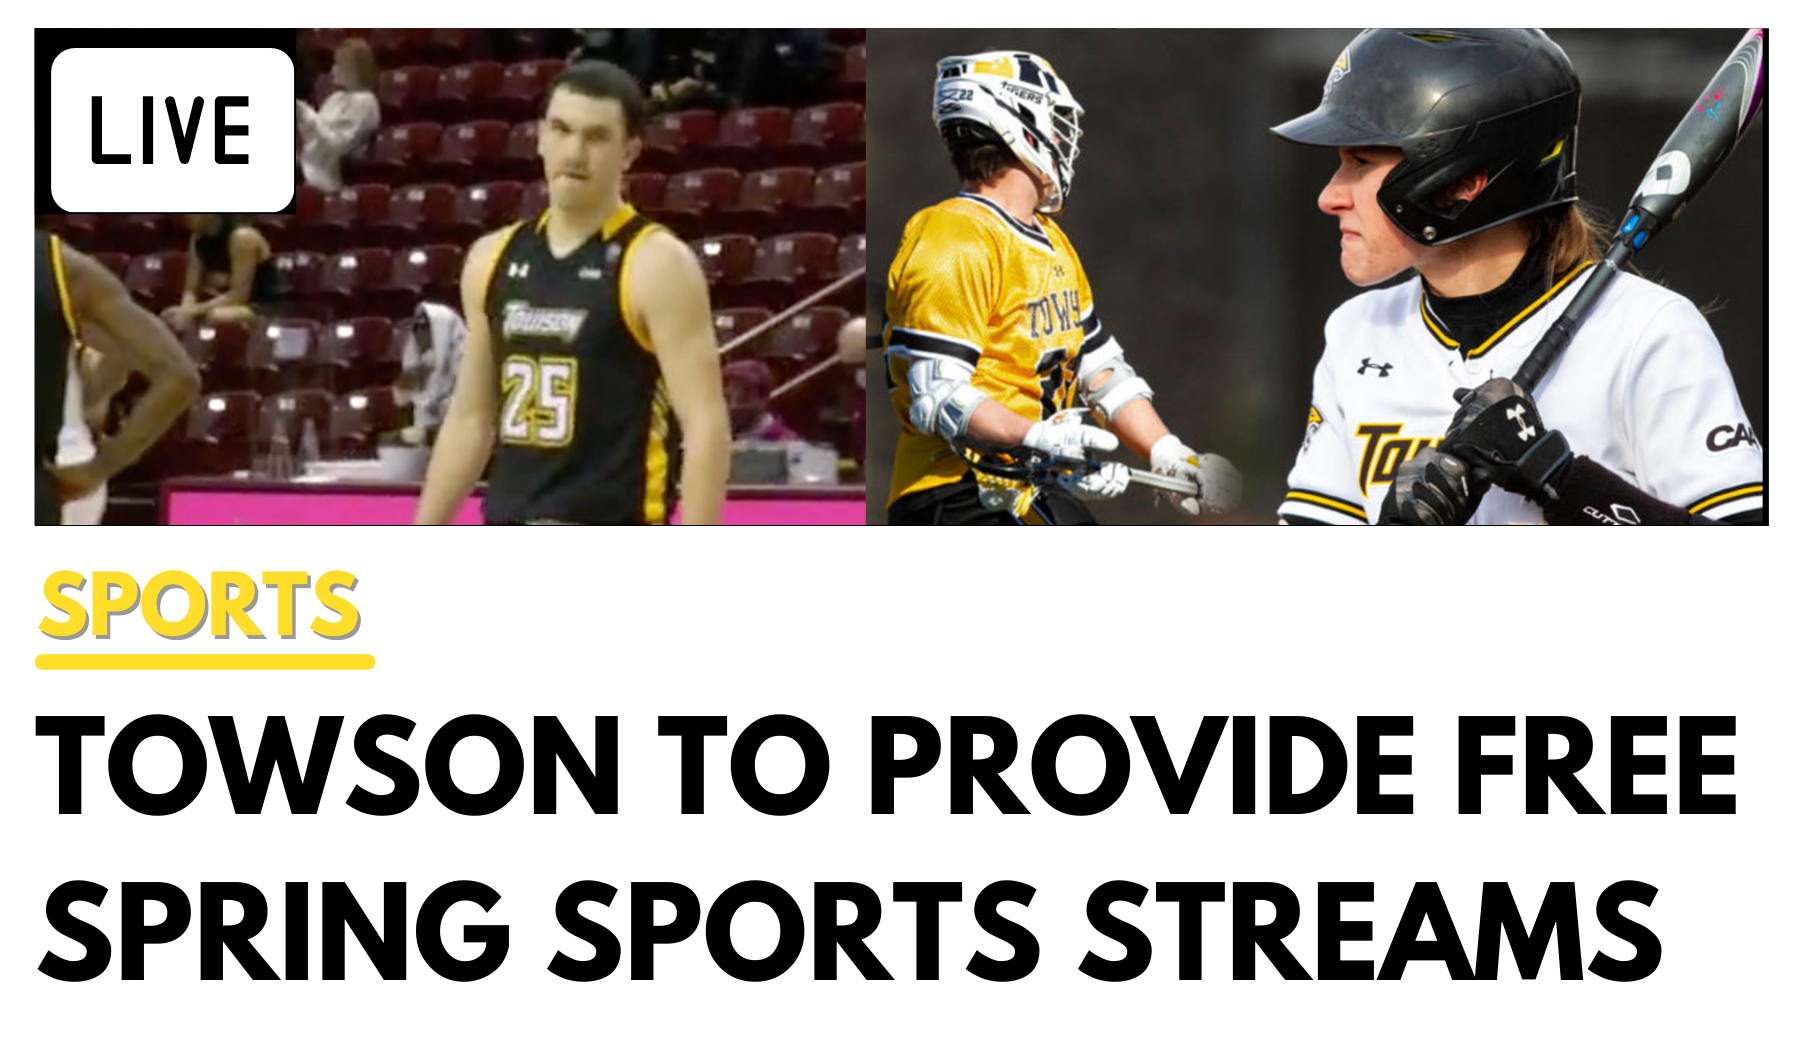 Towson Sports Network to provide free spring sports streams